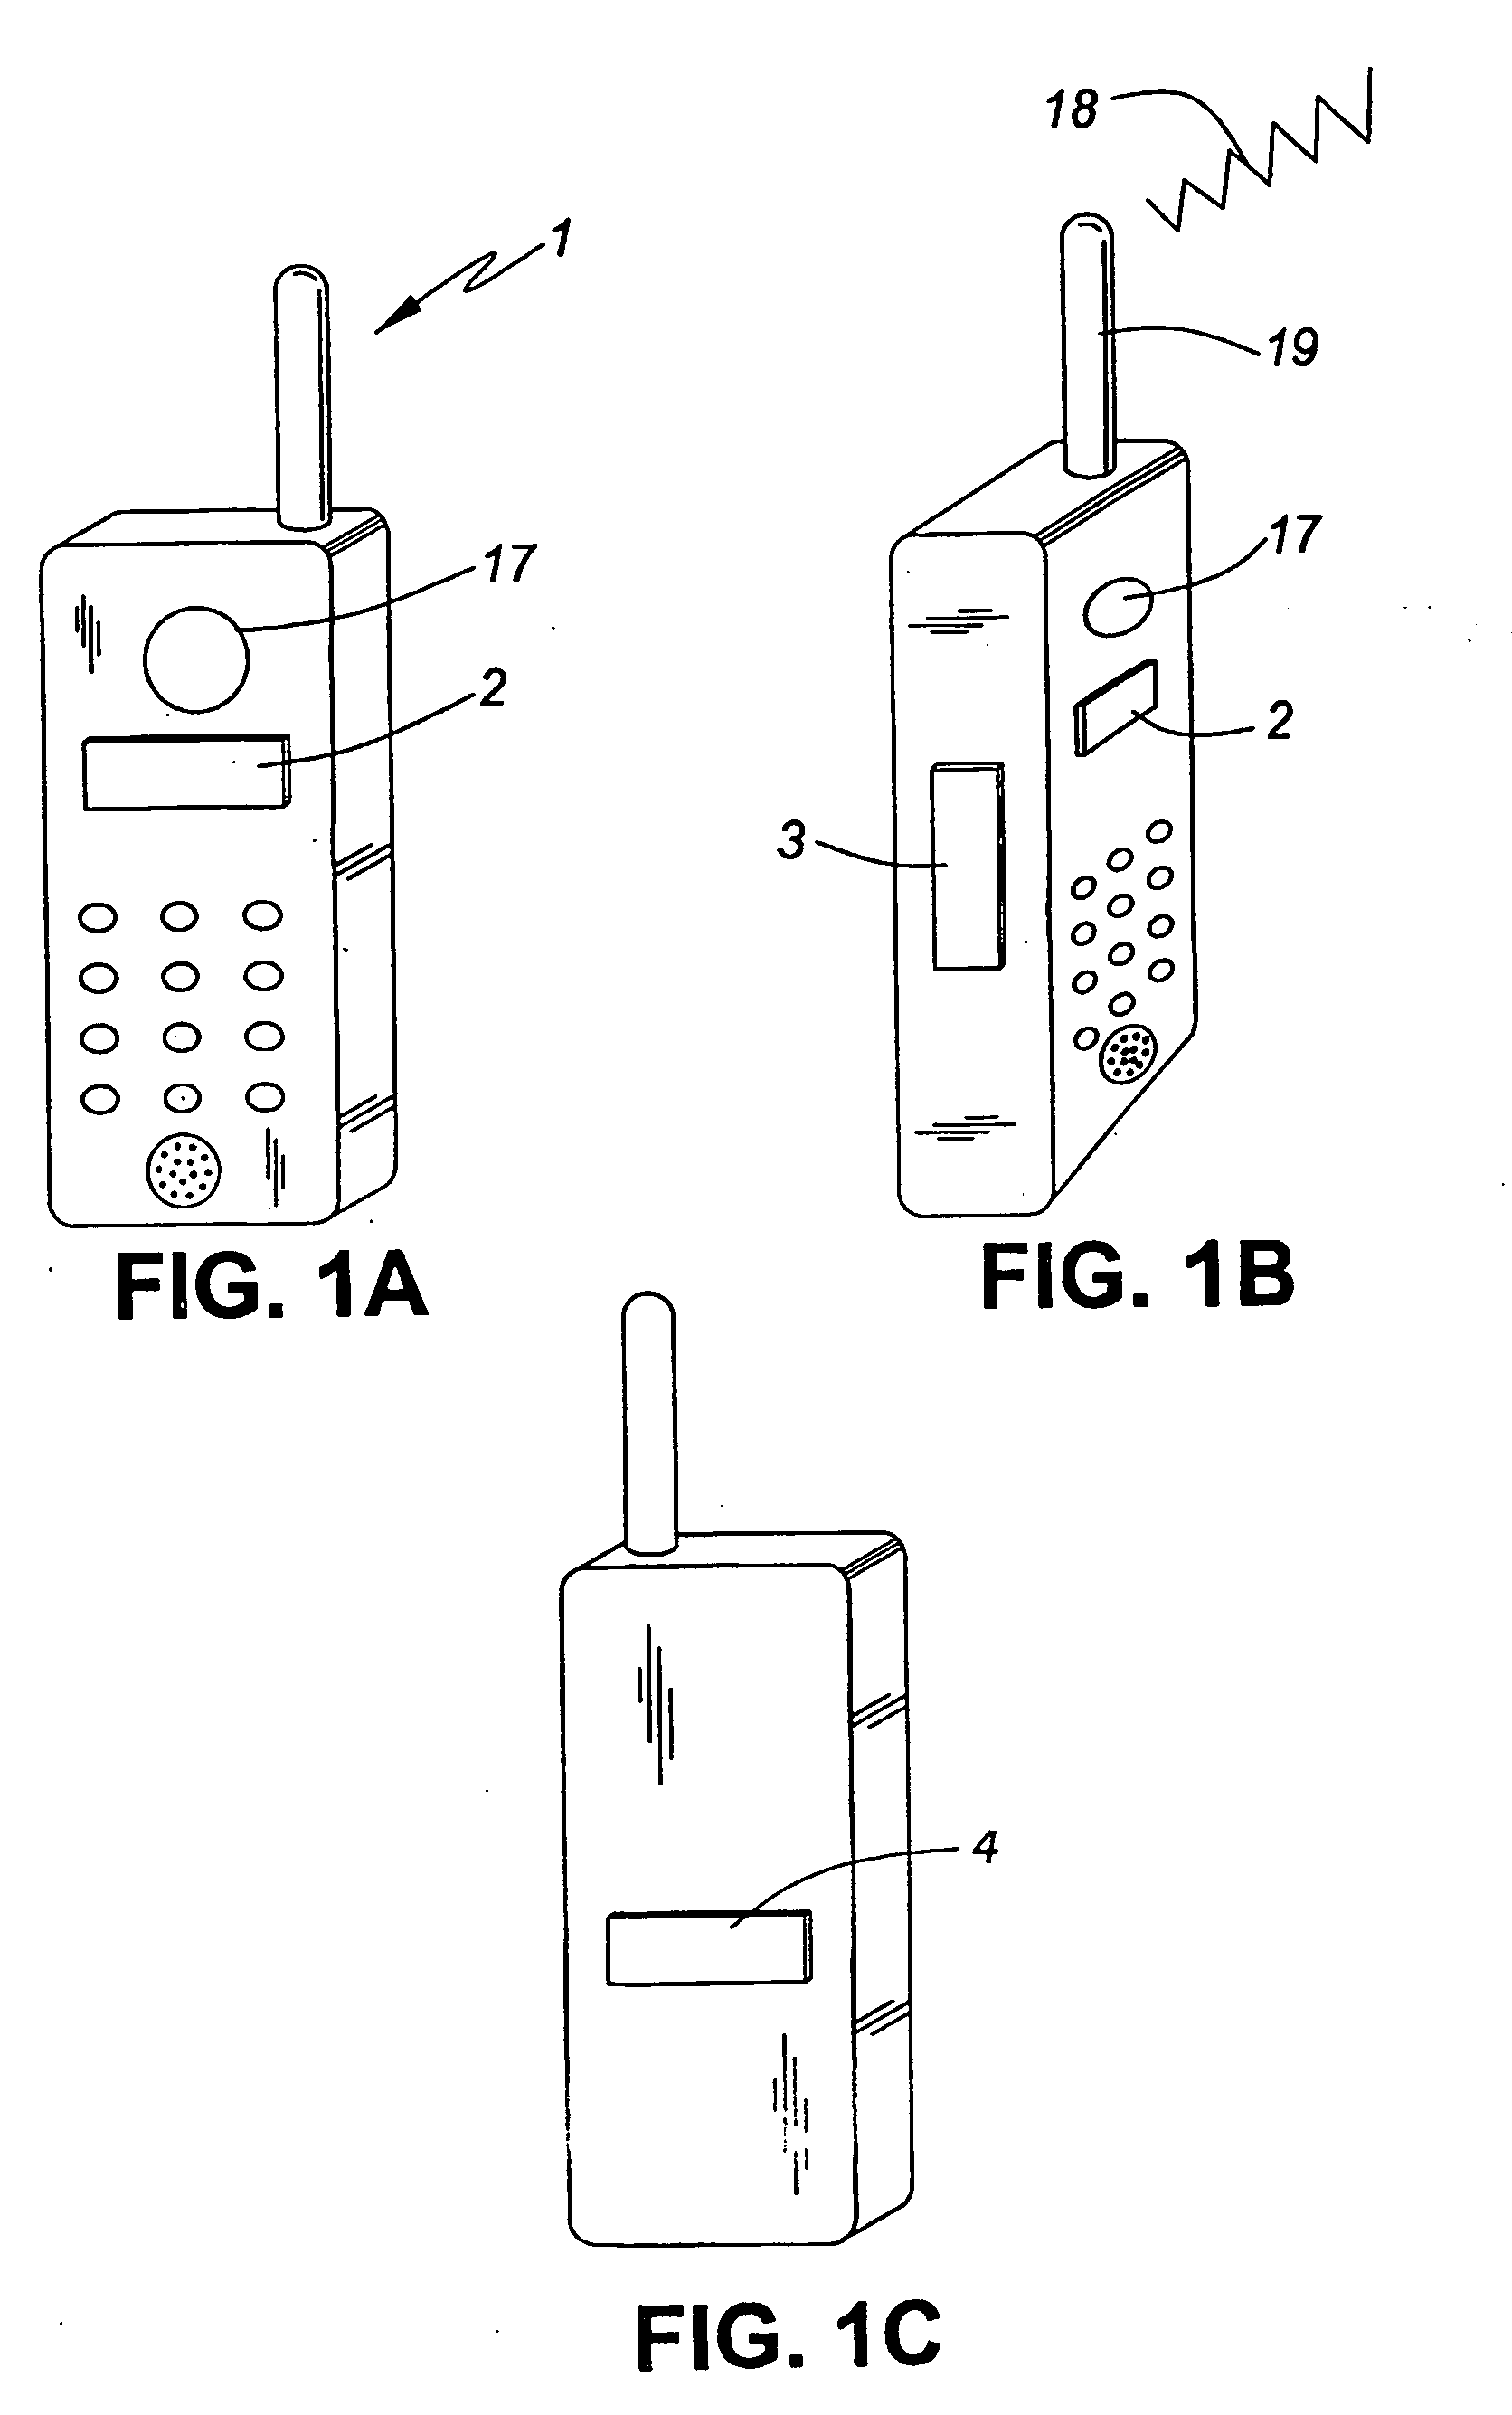 Remote monitoring of cardiac electrical activity using a cell phone device